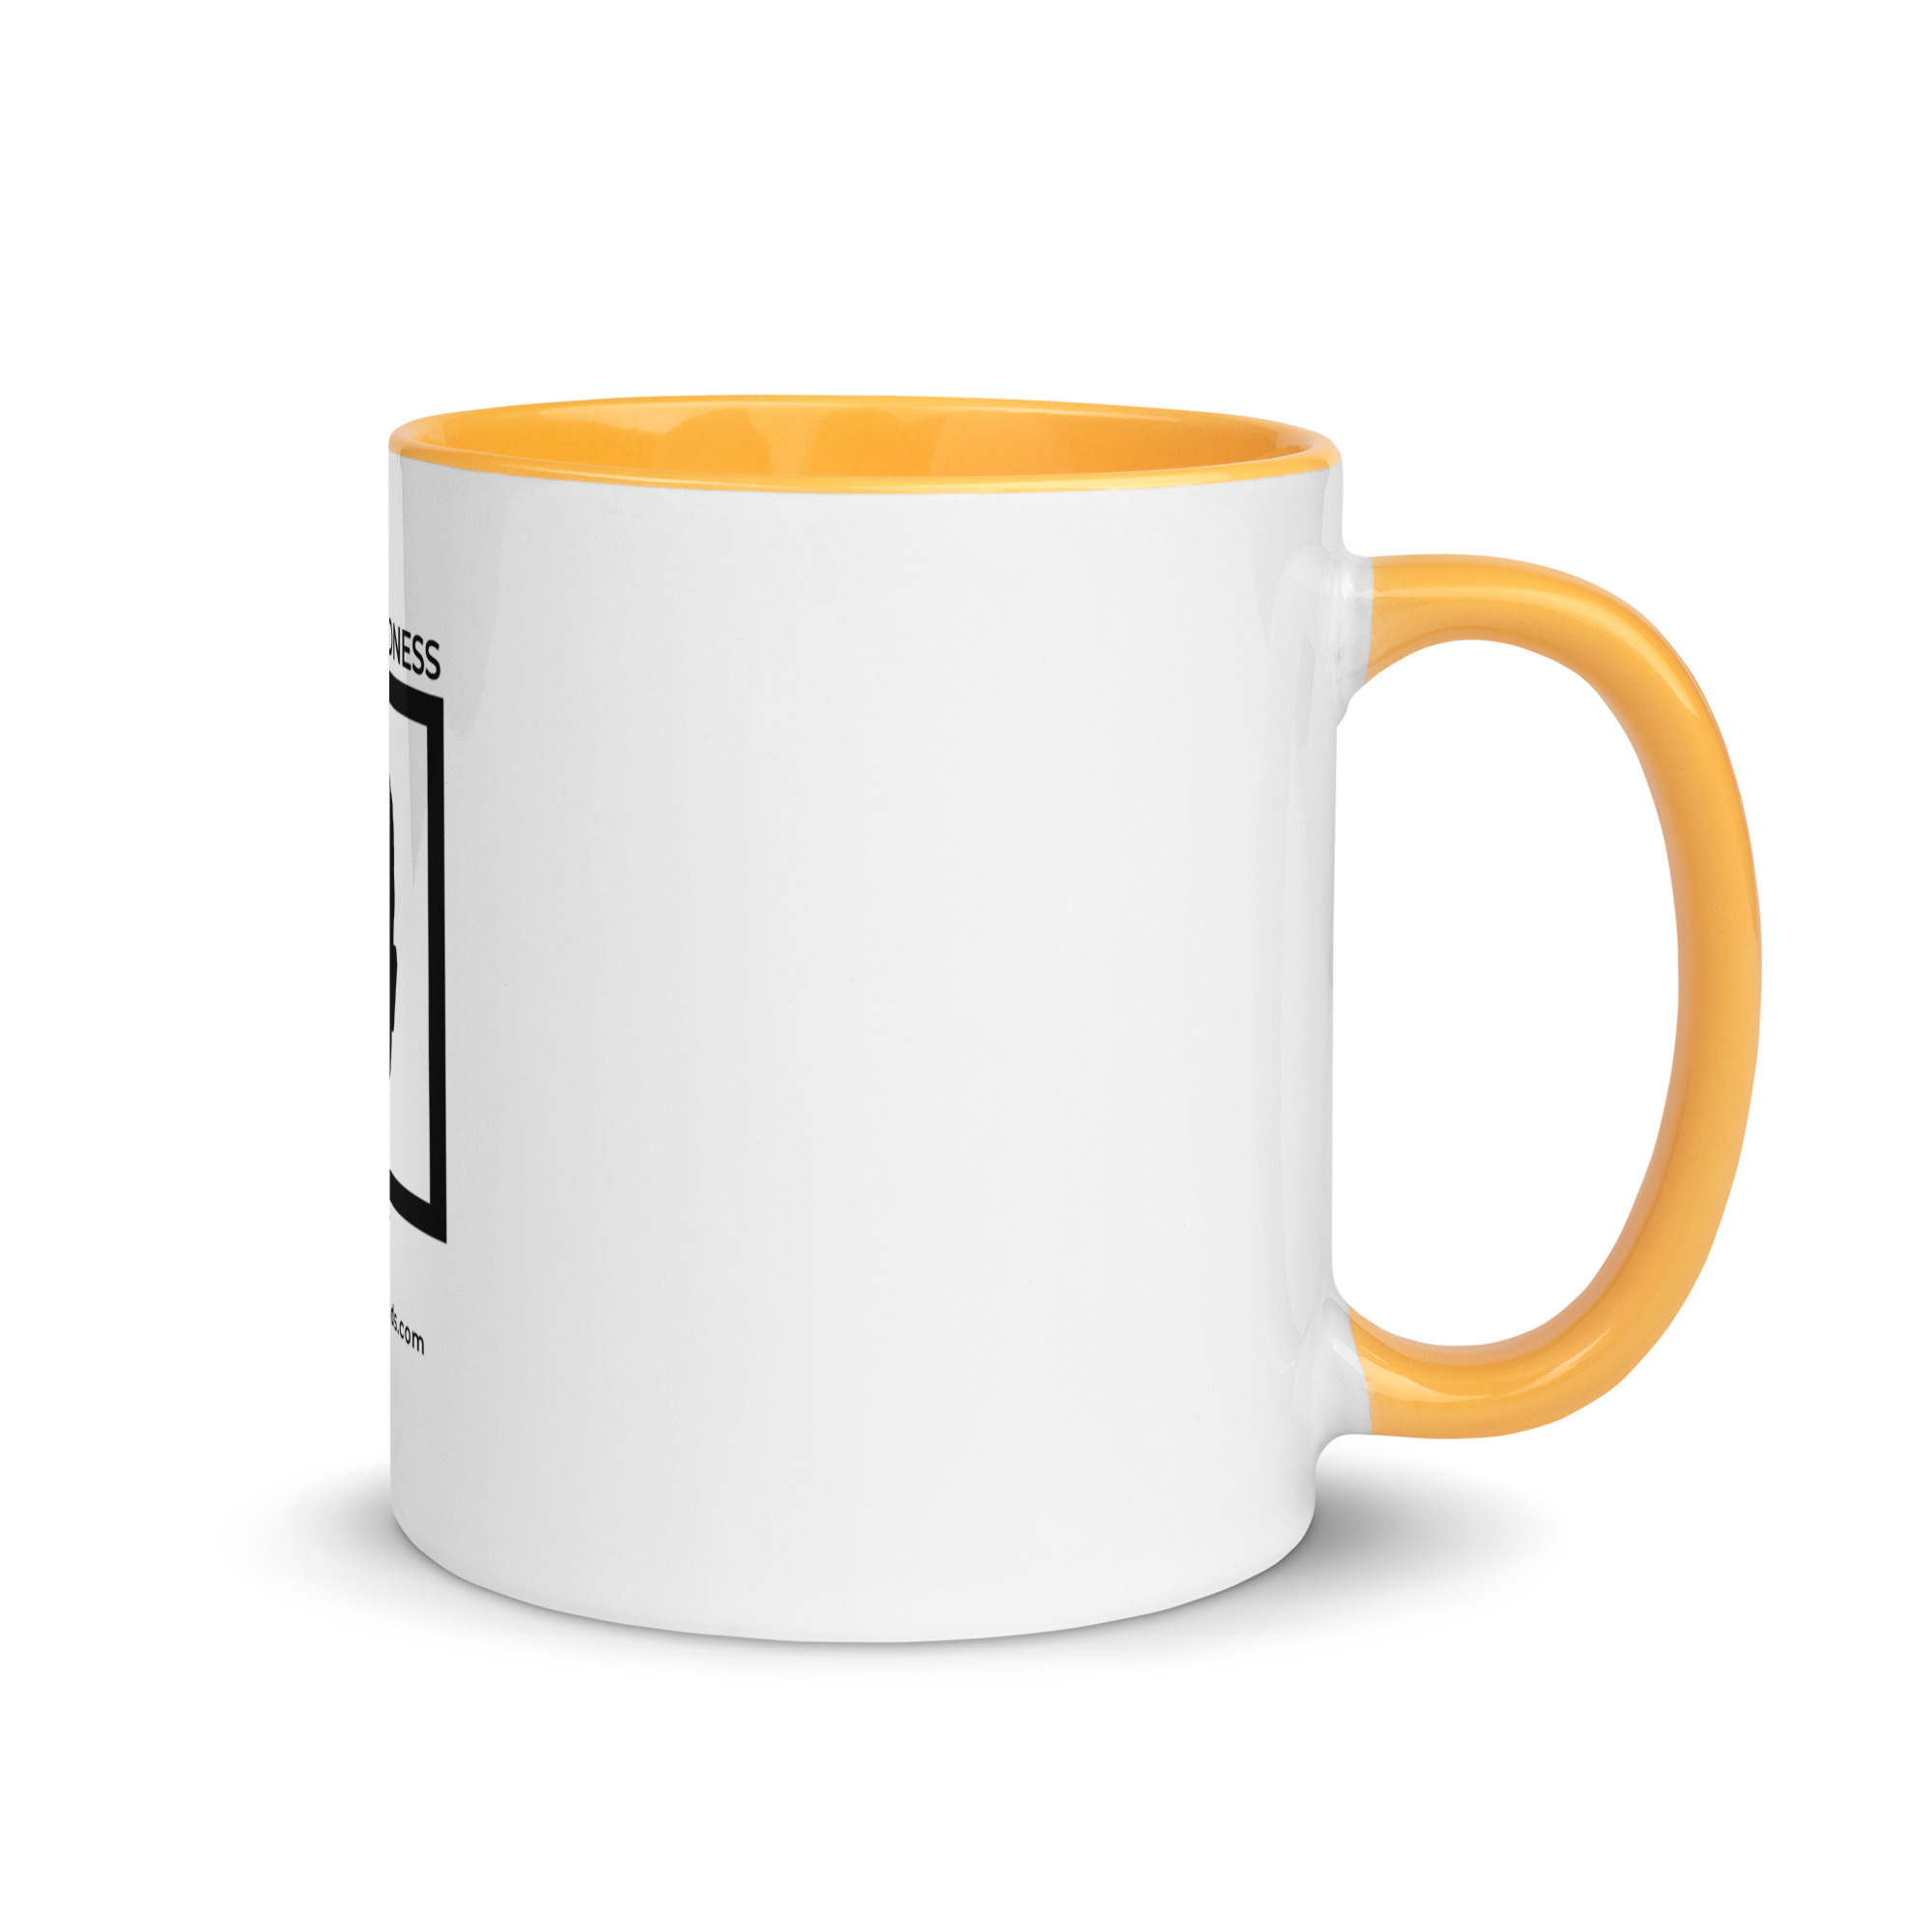 white-ceramic-mug-with-color-inside-golden-yellow-11-oz-right-6522a1a404332.jpg